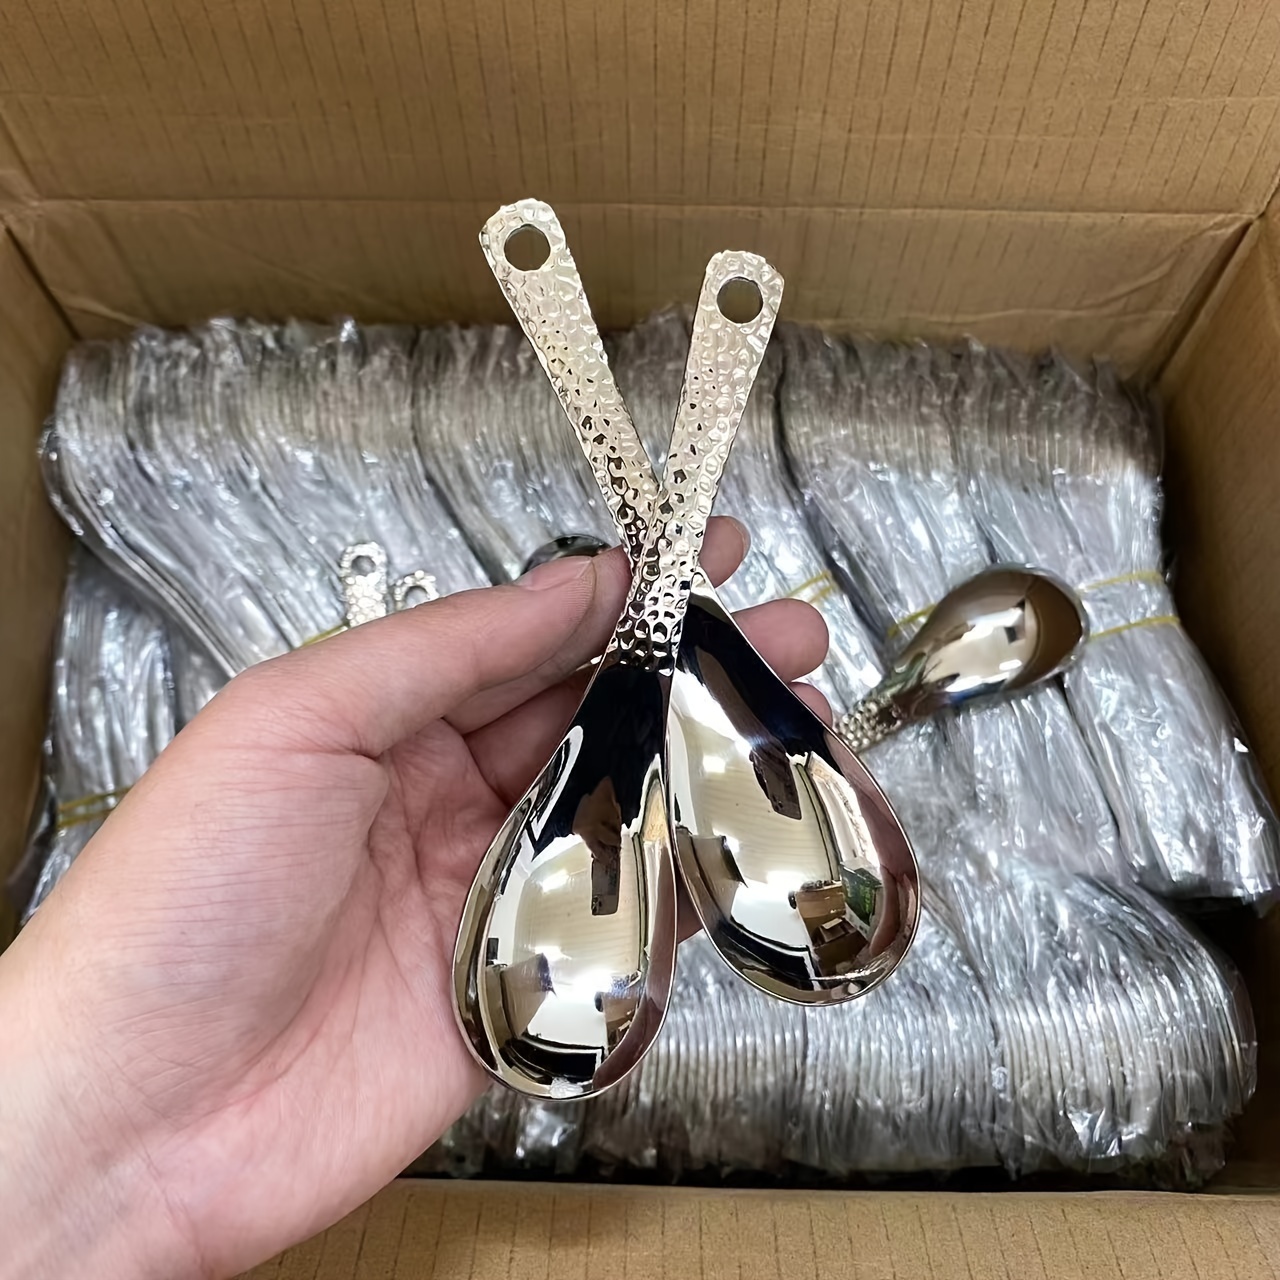 

4pcs Vintage Hammered Stainless Steel Dessert Spoons, High Aesthetic Value Retro Style Thickened Table Spoons For Home Use